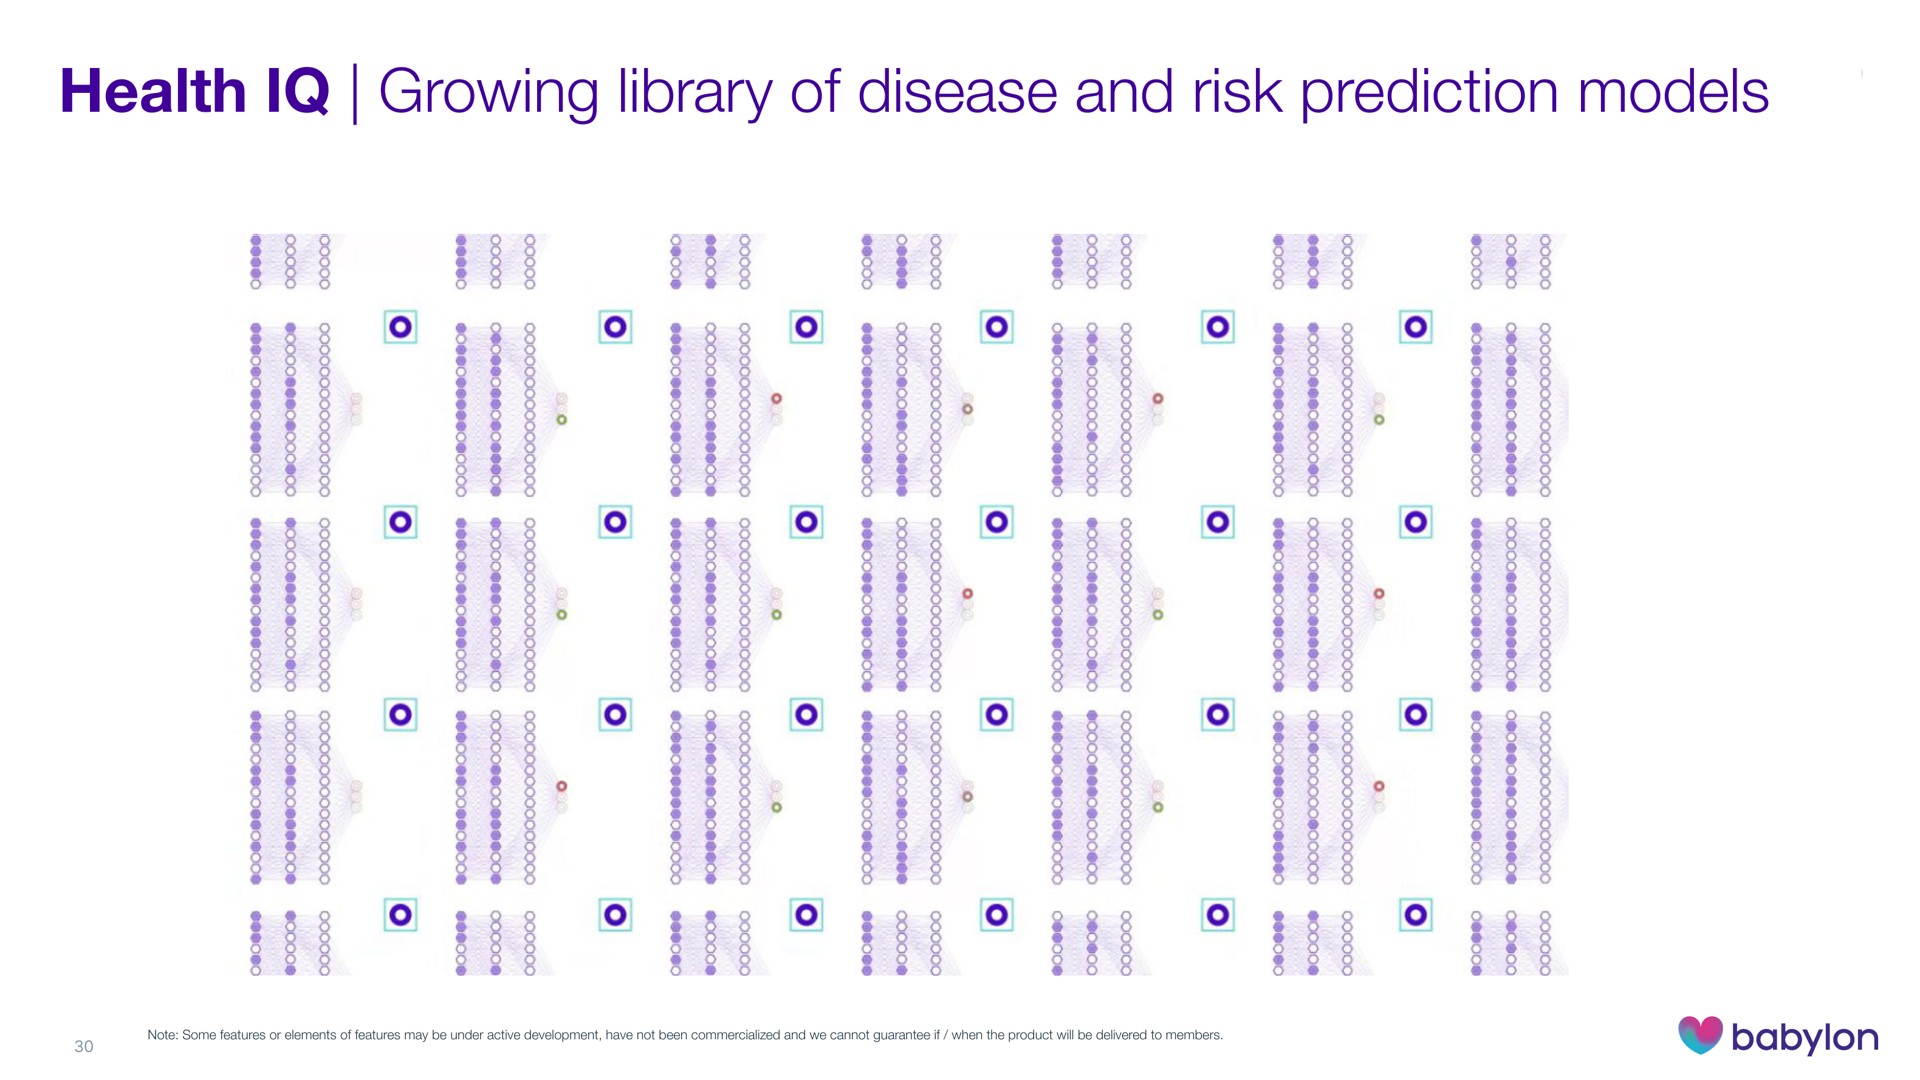 health growing library of disease and risk prediction models | Babylon